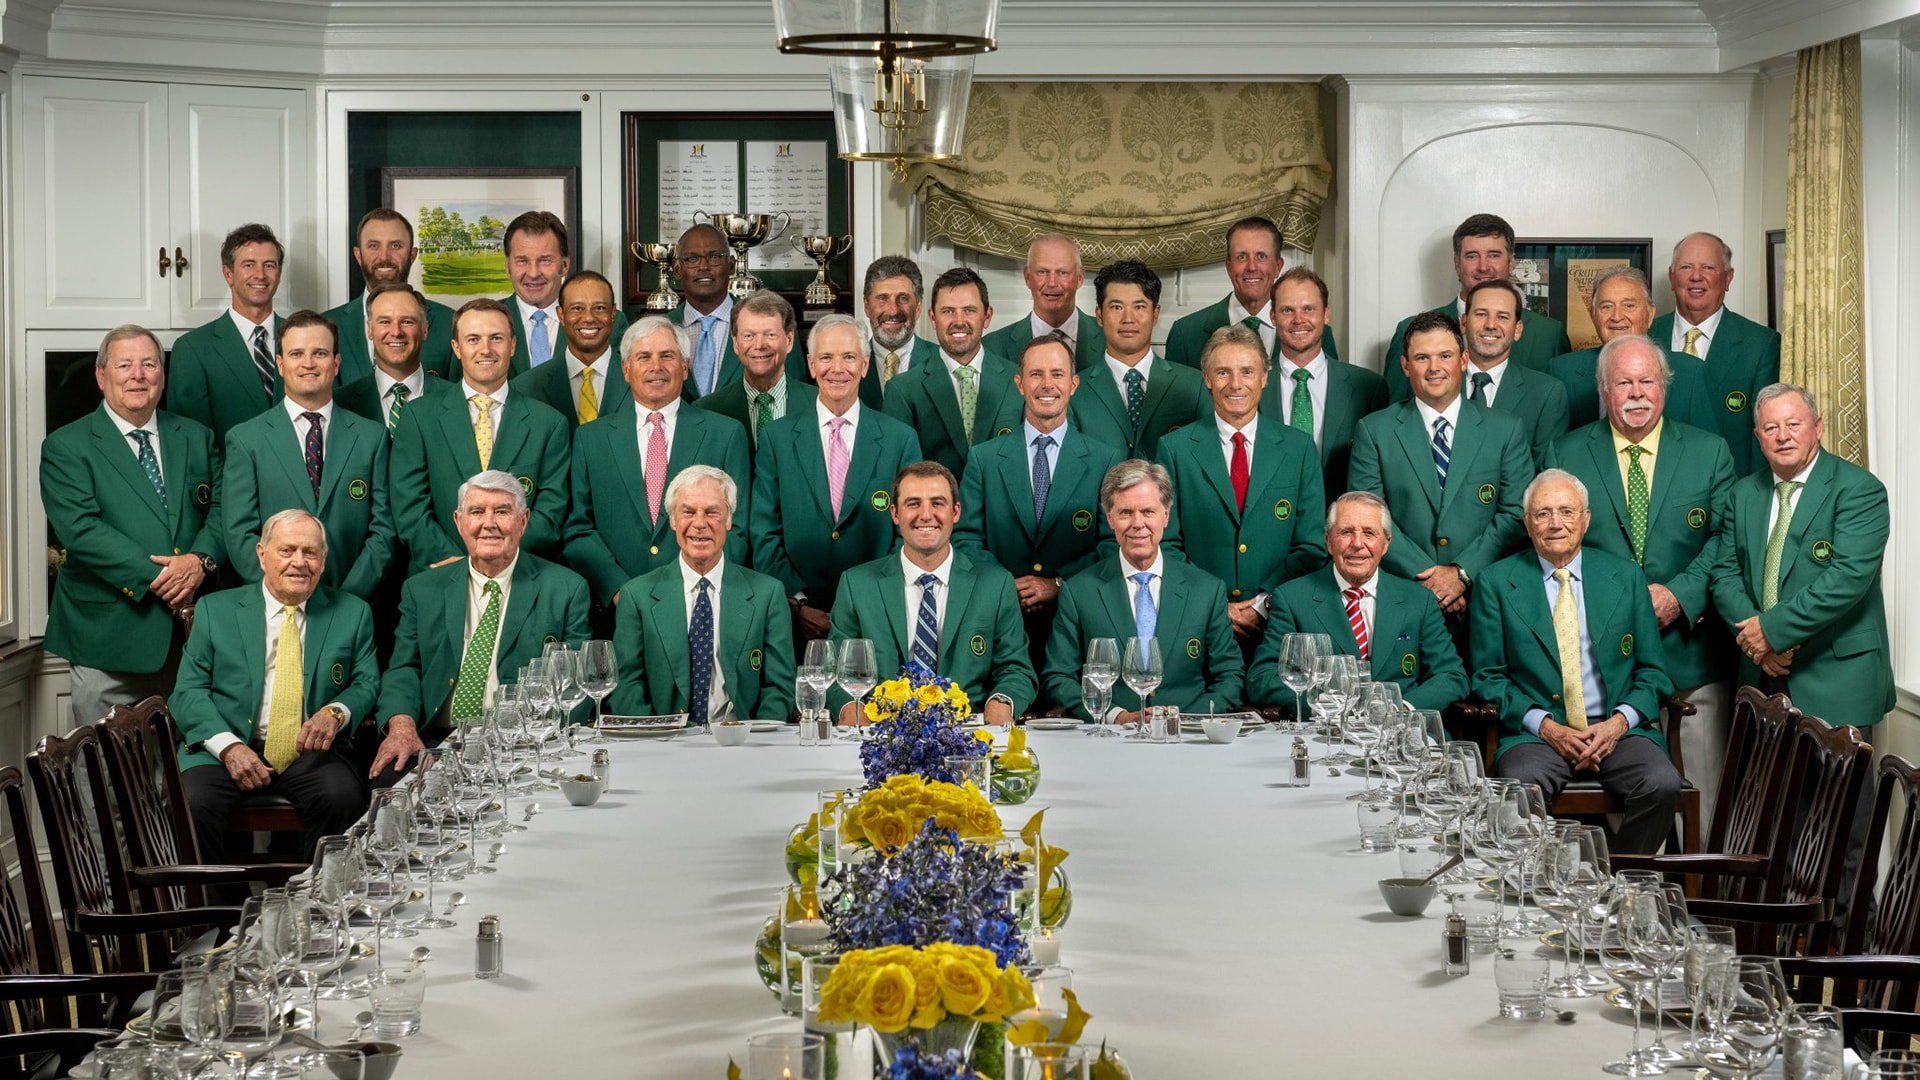 ‘Way too spicy’: Inside the 2023 Masters Champions Dinner